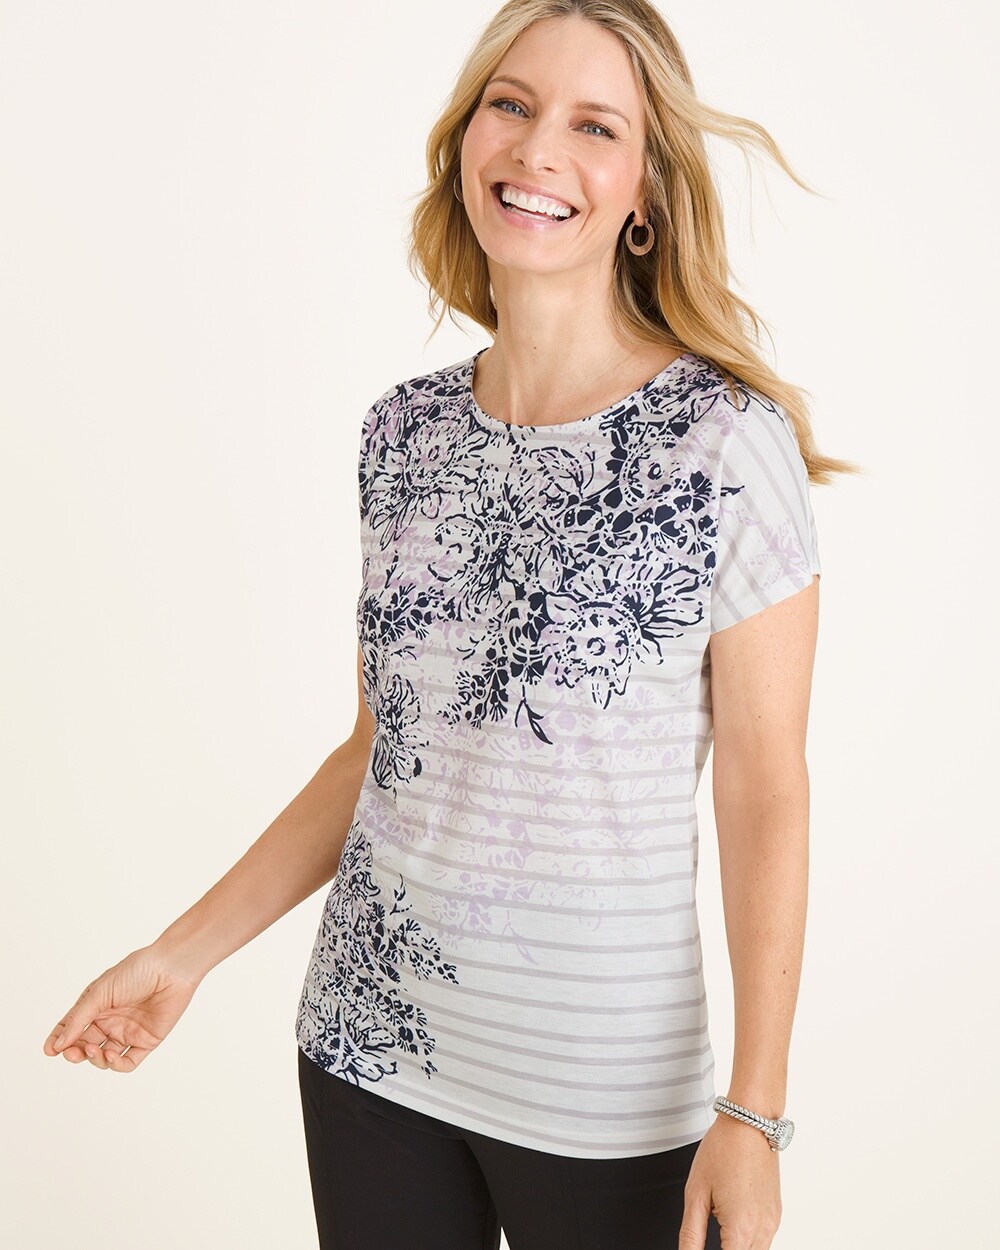 Zenergy Striped Floral Tee